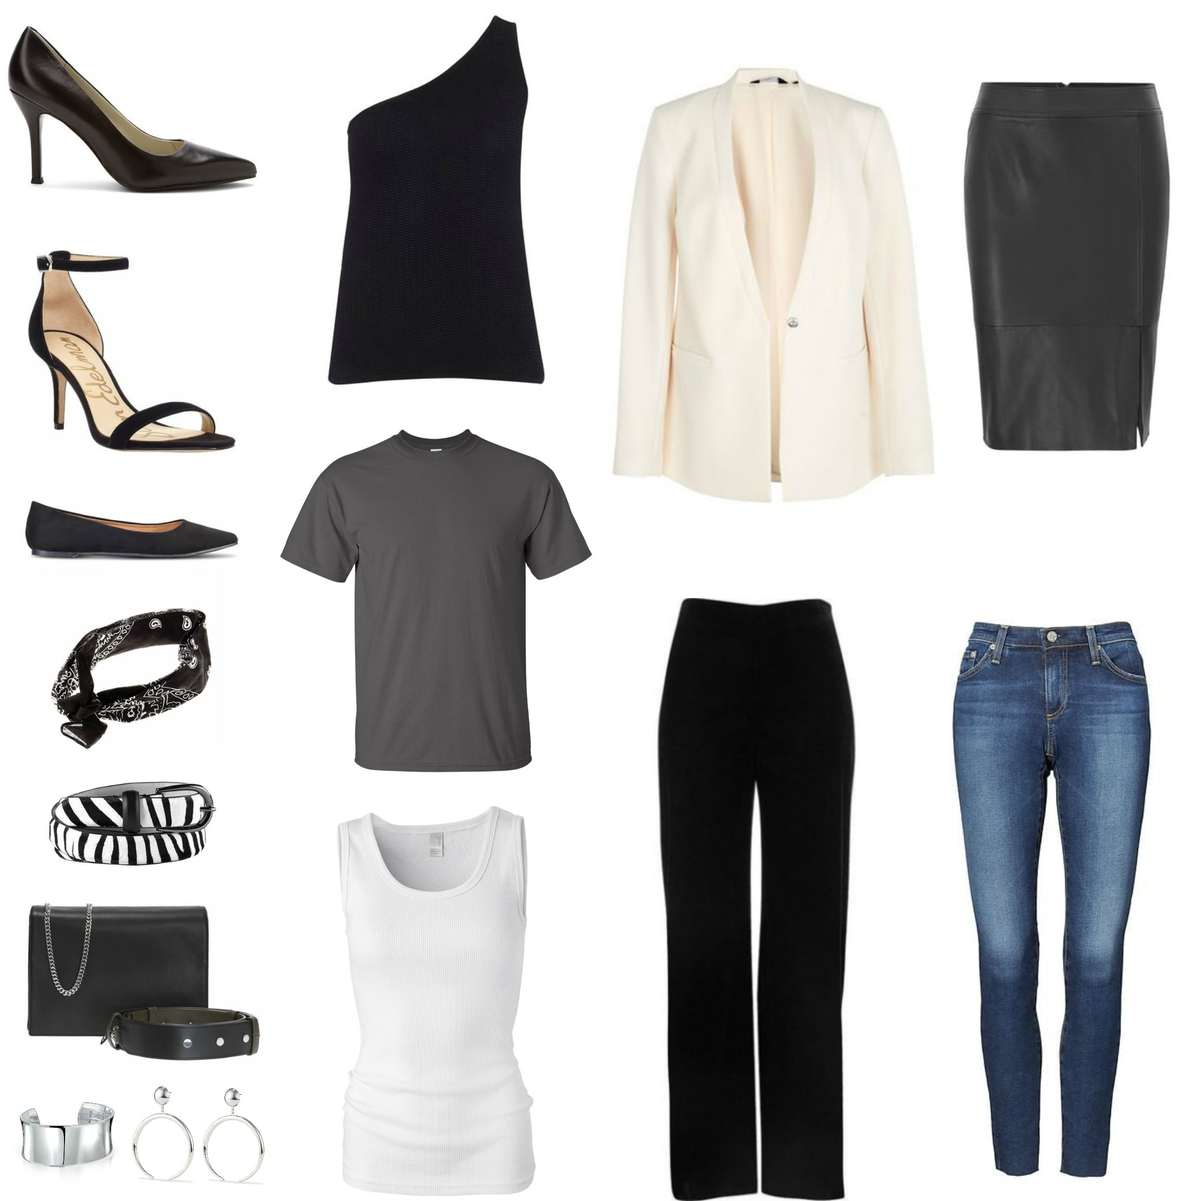 Image is of a capsule wardrobe featuring seven pieces of clothing, three pairs of shoes, five accessories, and the ability to mix and match them into 18 or more different outfits.